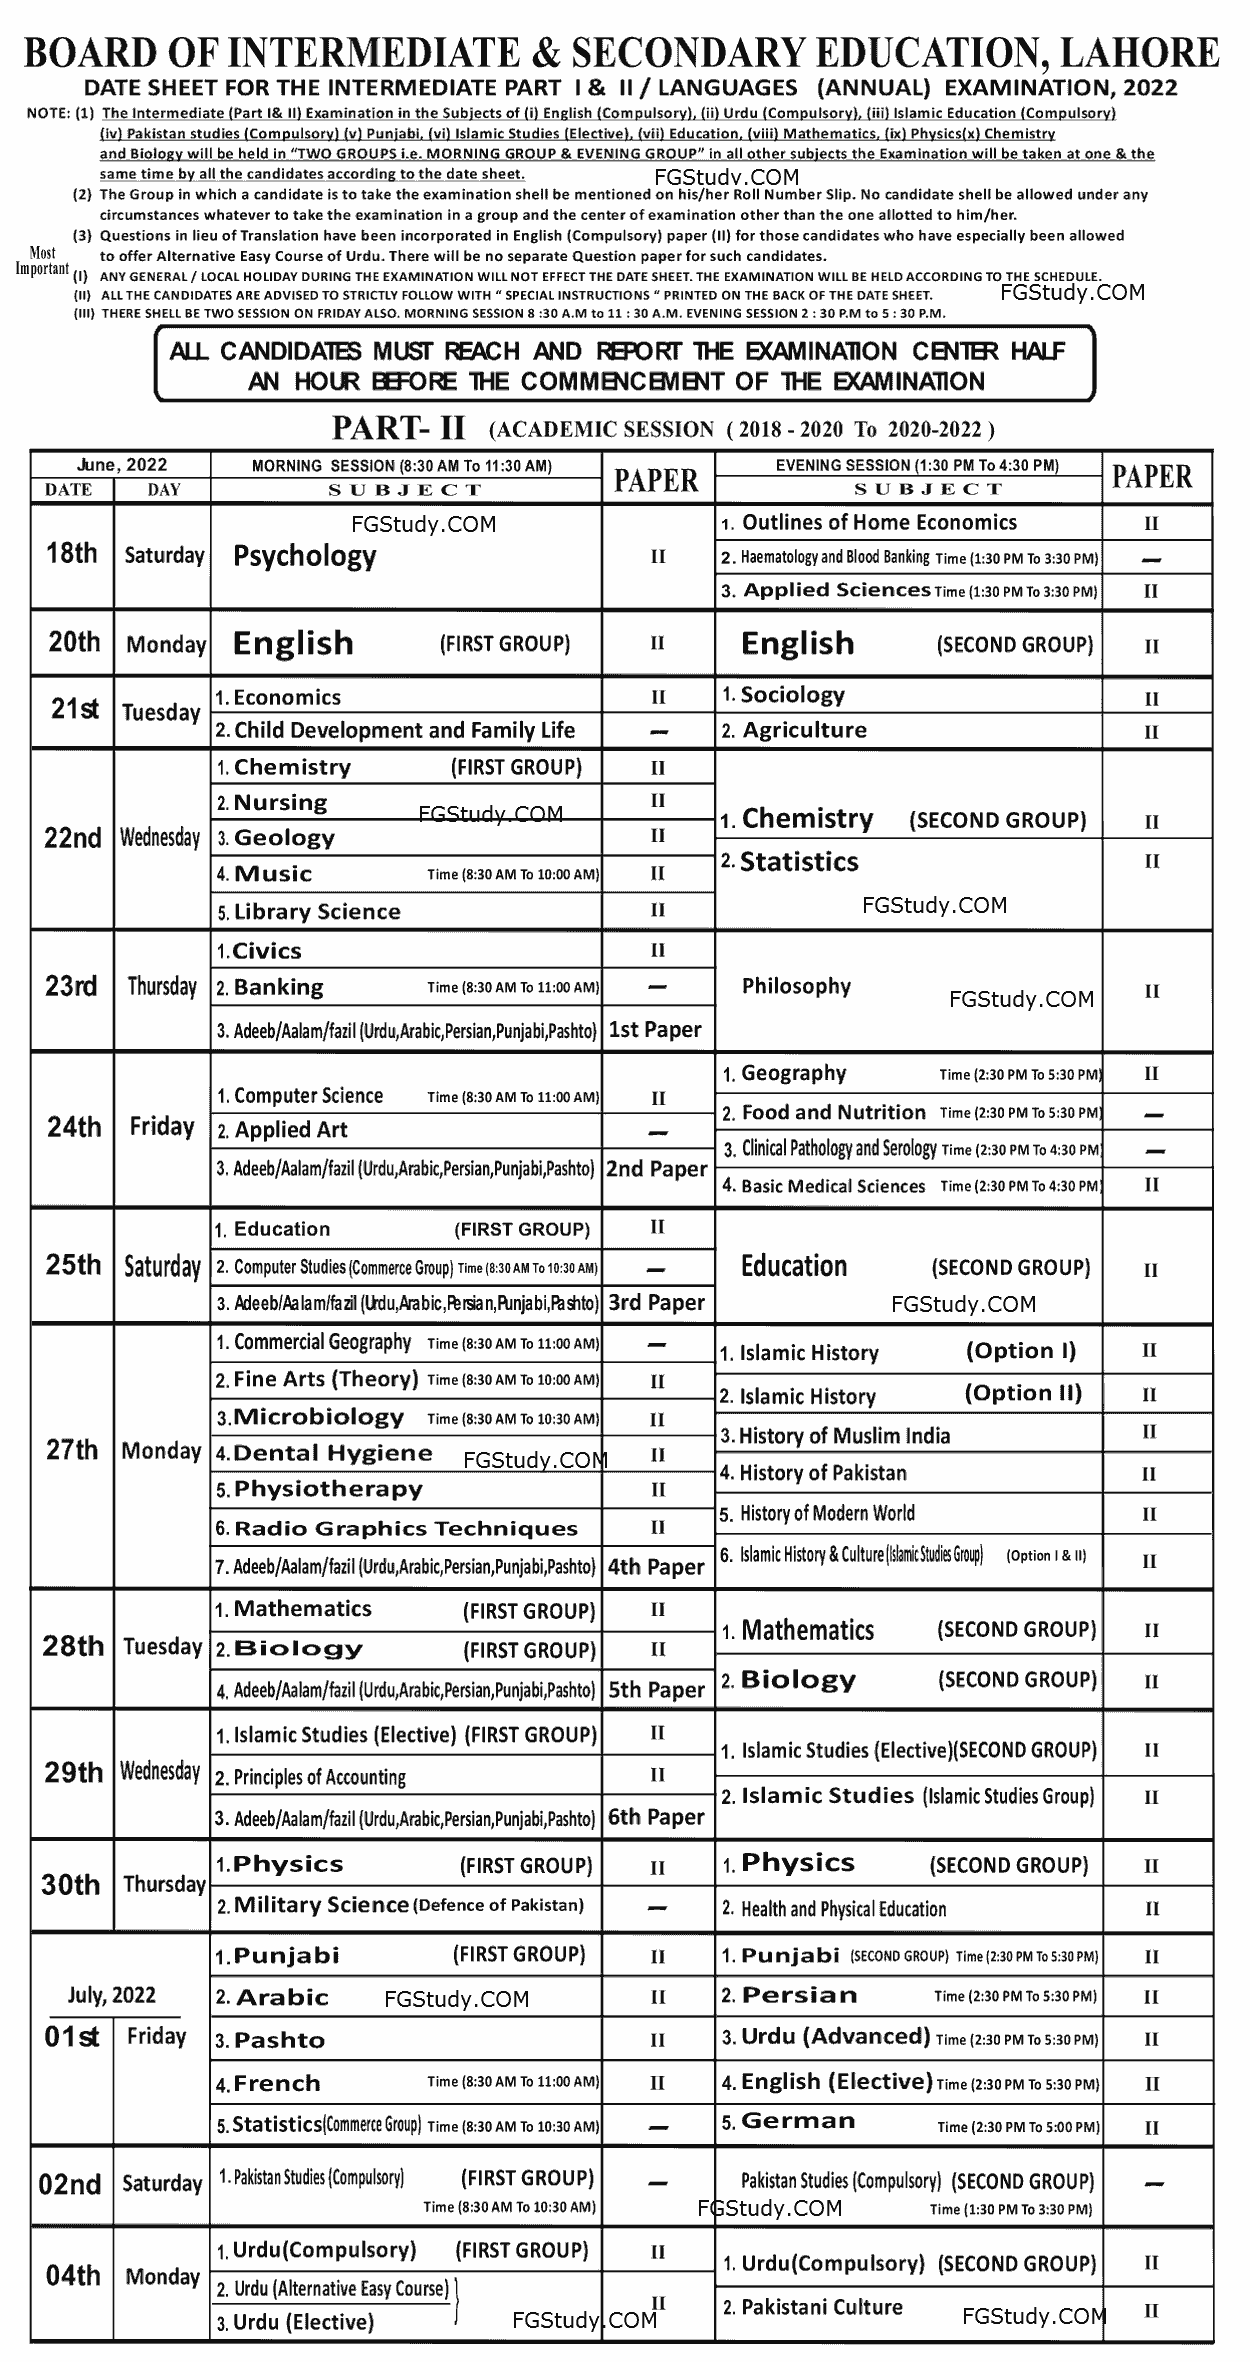 12th class lahore board date sheet 2022 Page 1